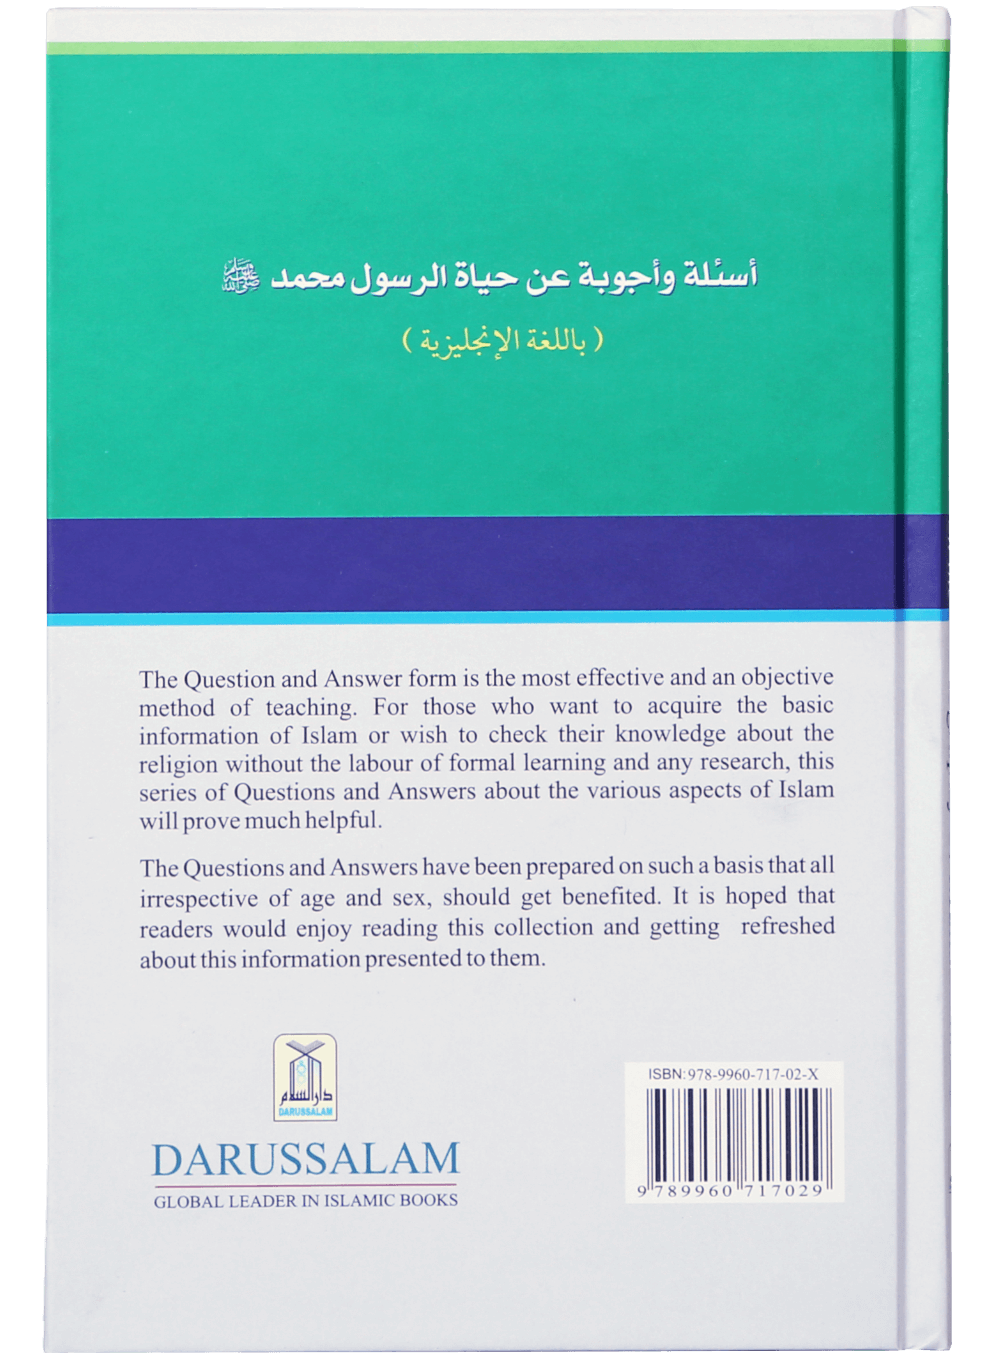 darussalam-2017-10-03-10-05-07q.a—on-the-biography-of-the-muhammad-(2-vol)-(5)